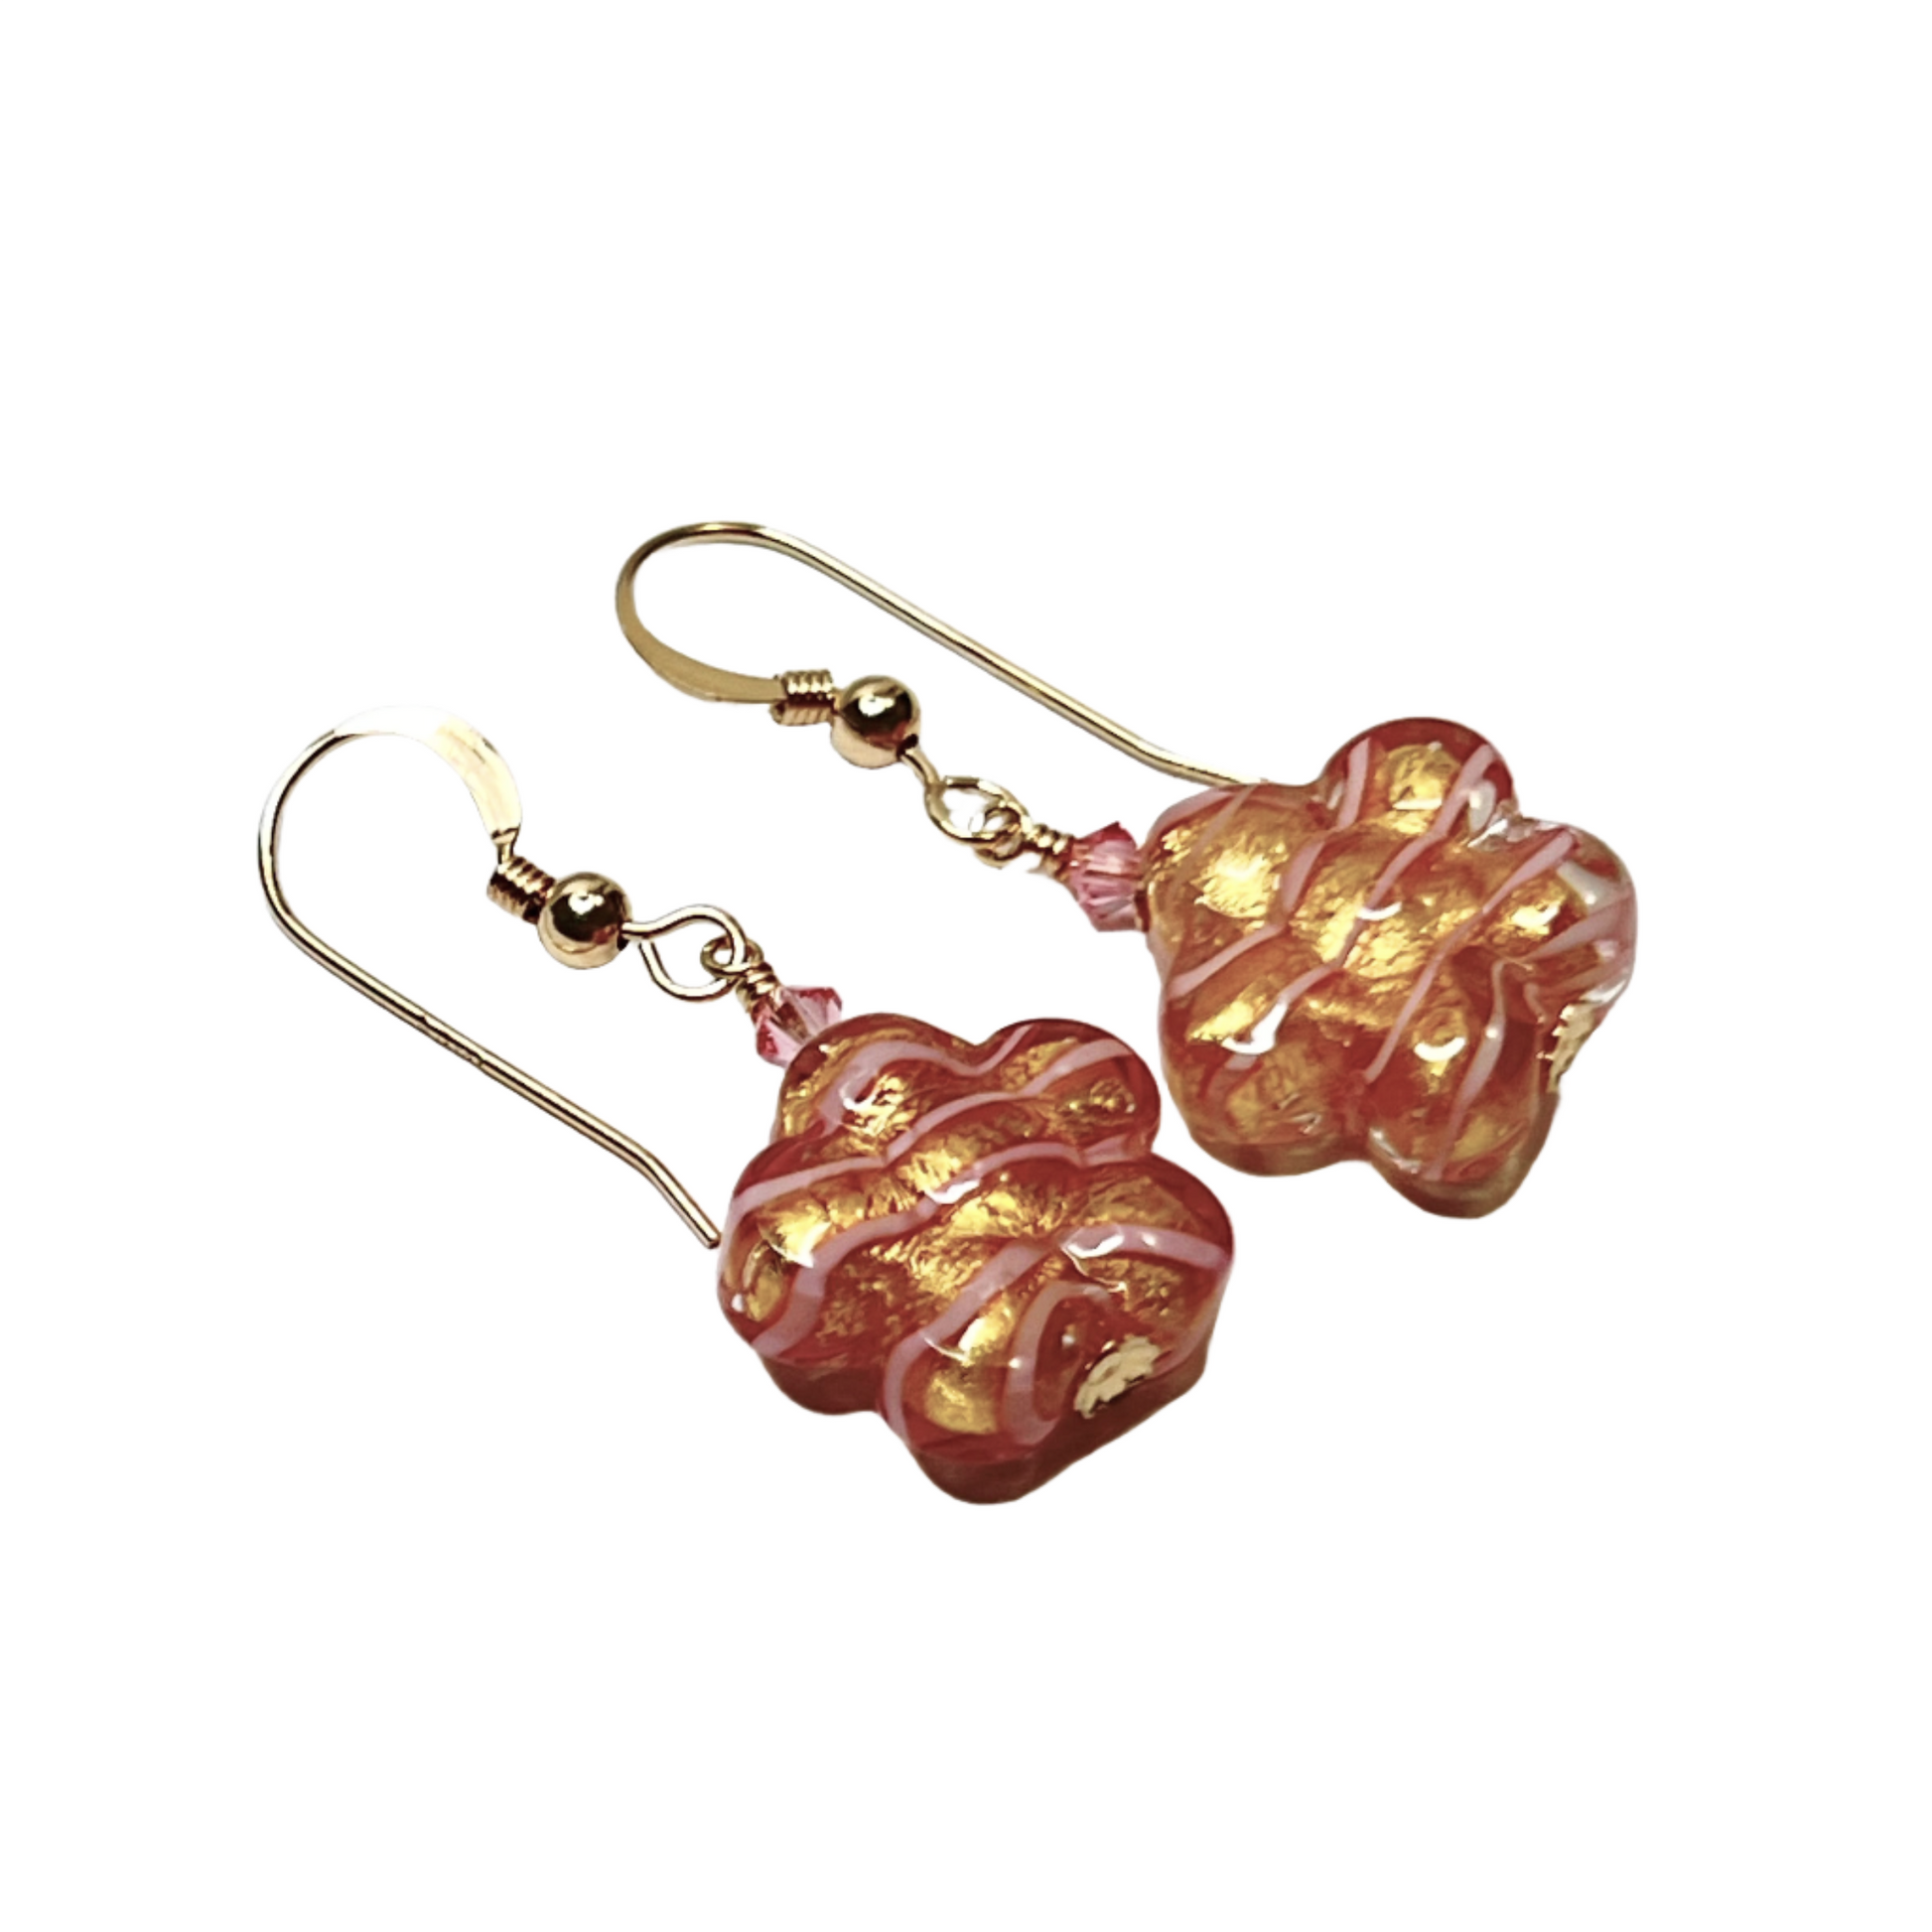 a pair of Murano glass earrings with a flower shape